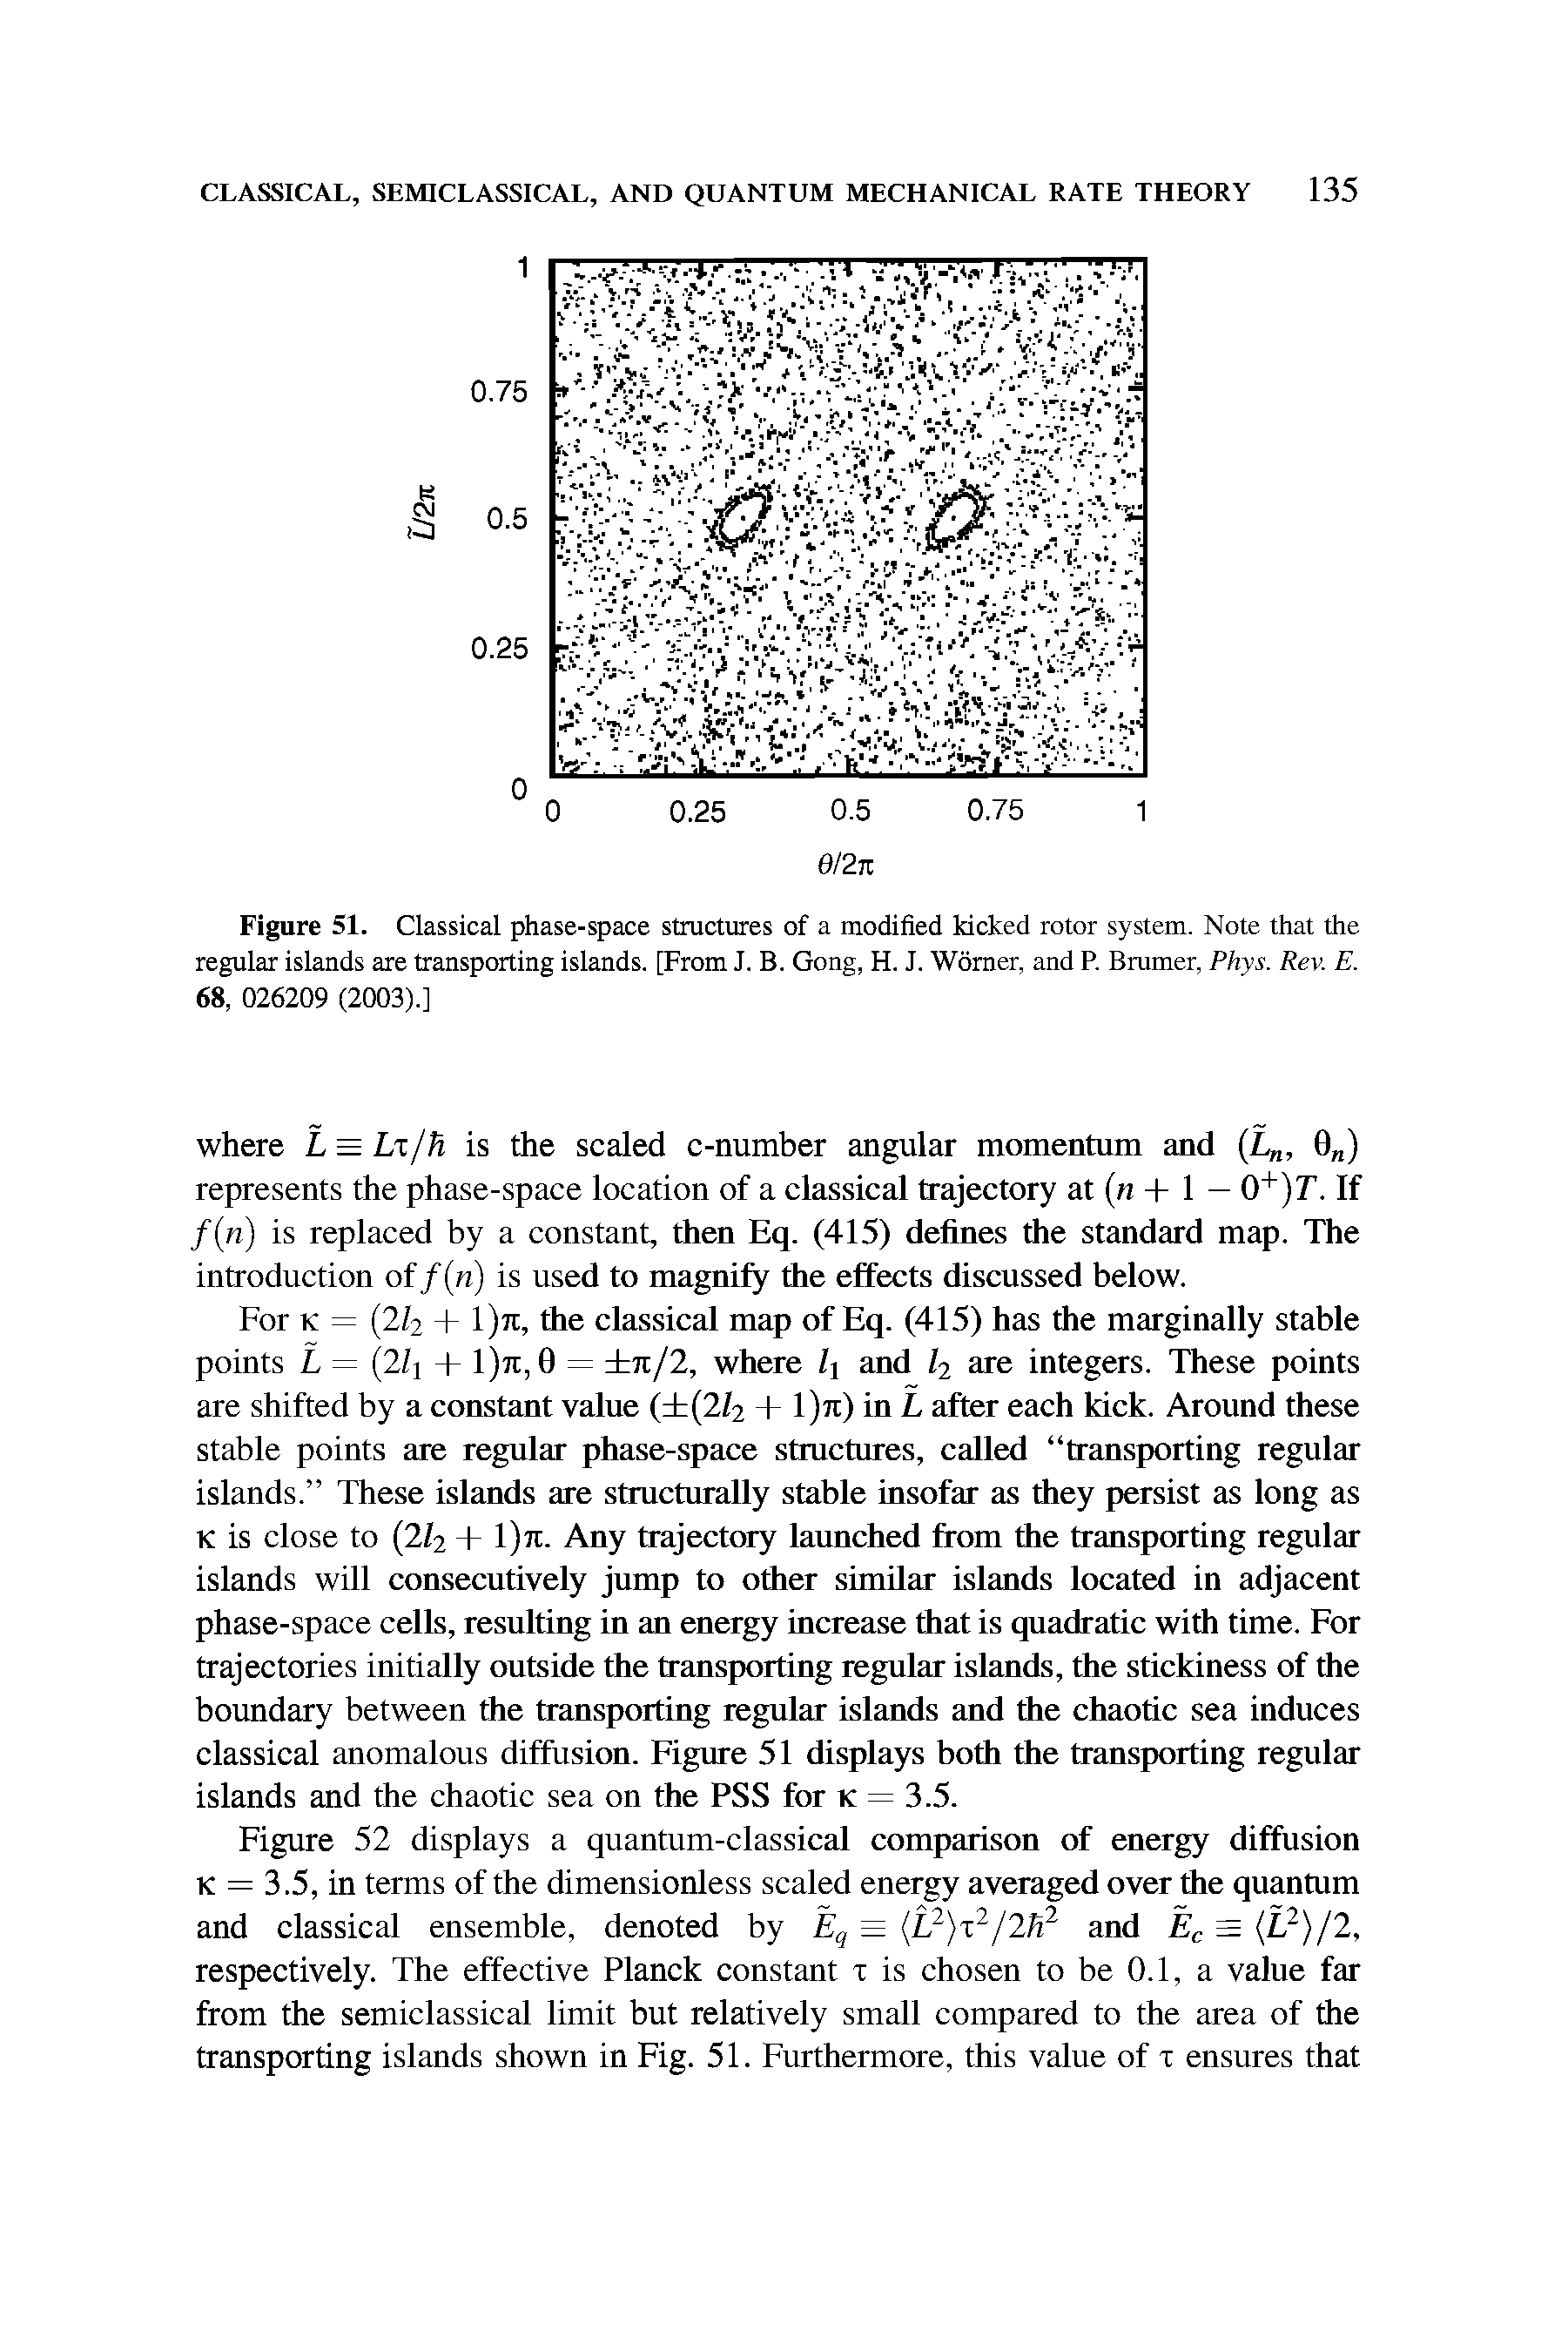 Figure 51. Classical phase-space structures of a modified kicked rotor system. Note that the regular islands are transporting islands. [From J. B. Gong, H. J. Worner, and P. Brumer, Phys. Rev. E. 68, 026209 (2003).]...